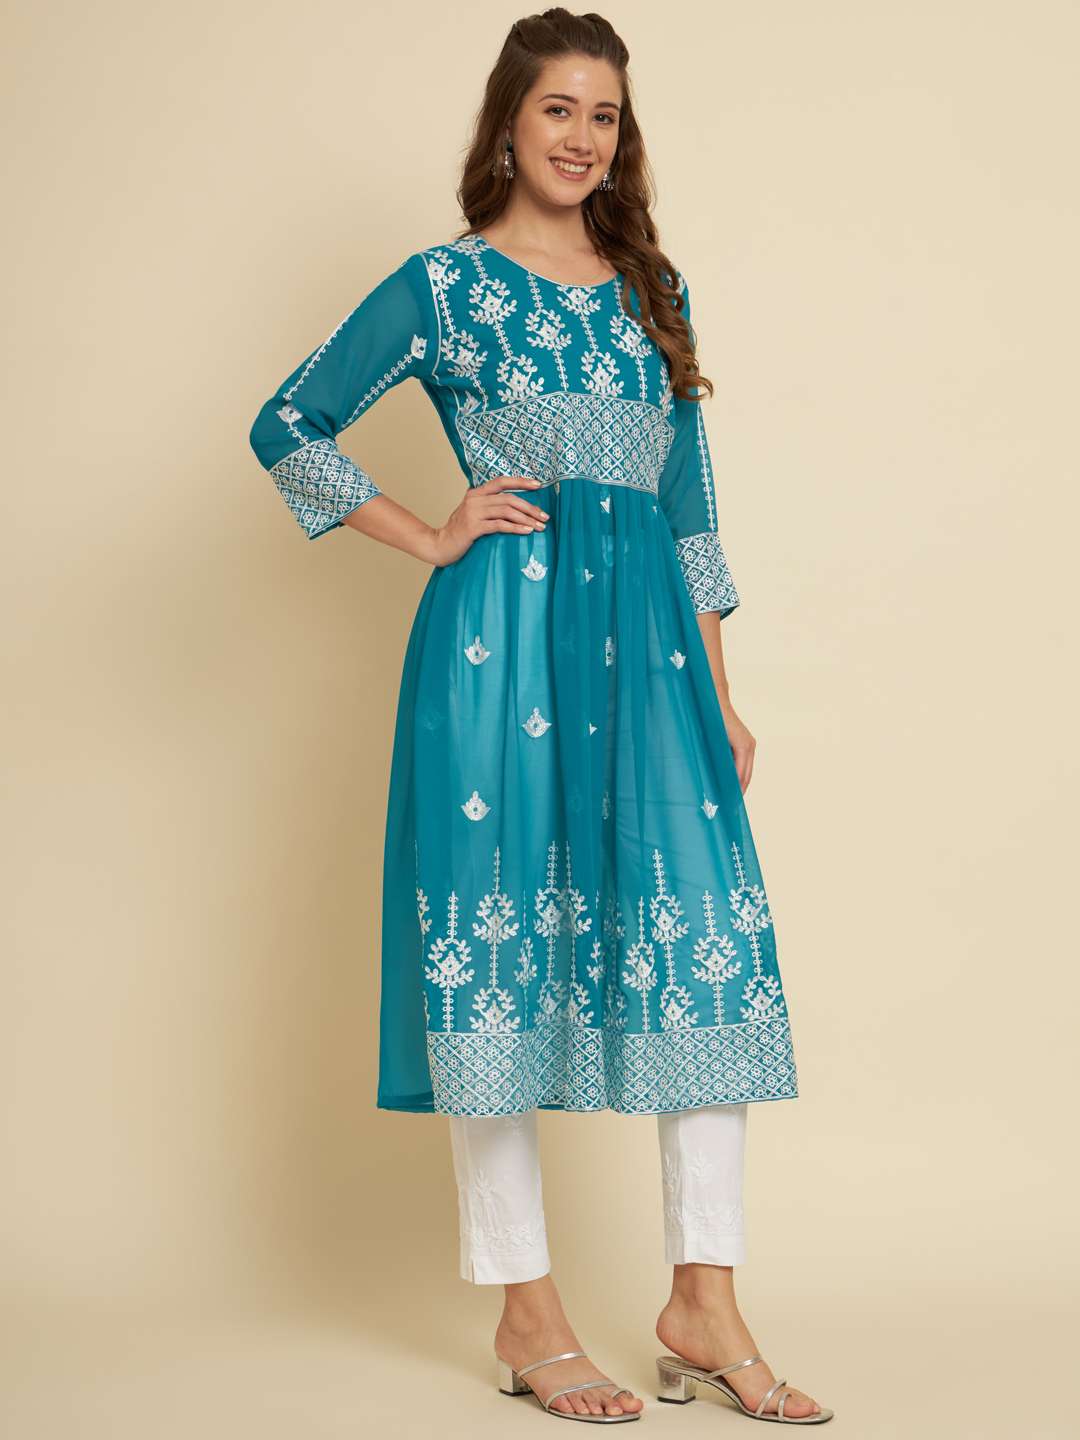 Sia 2 Soft Georgette Kurta with Embroidery Work Anarkali shape with Empire style Three Quarter Sleeves Round Neck